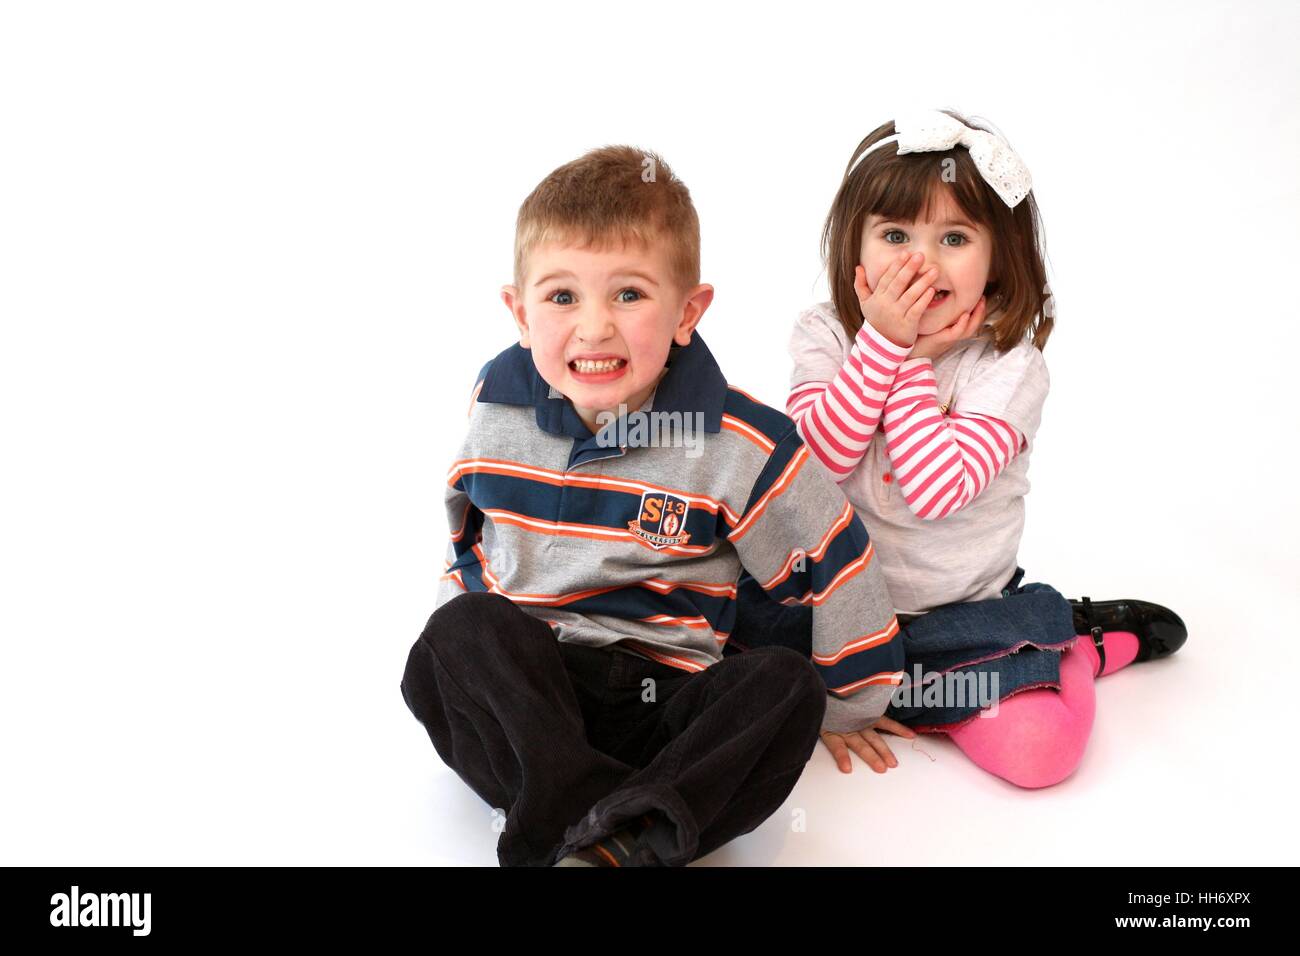 Brother and sister children kids laughing playing and having fun together shock surprise excitement siblings girl boy twins hand over face concept Stock Photo